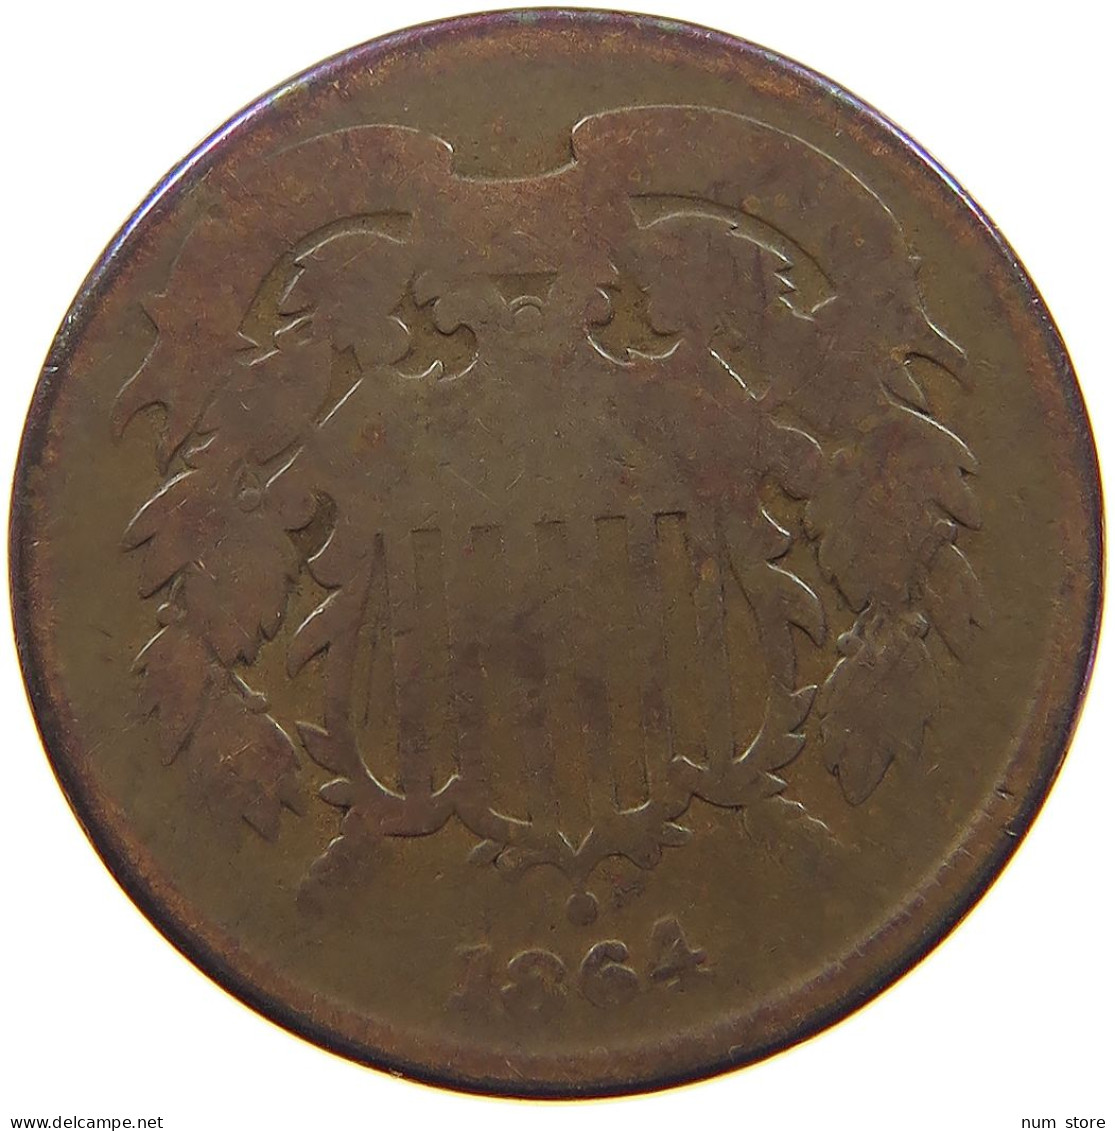 UNITED STATES OF AMERICA 2 CENTS 1864  #c079 0131 - 2, 3 & 20 Cent